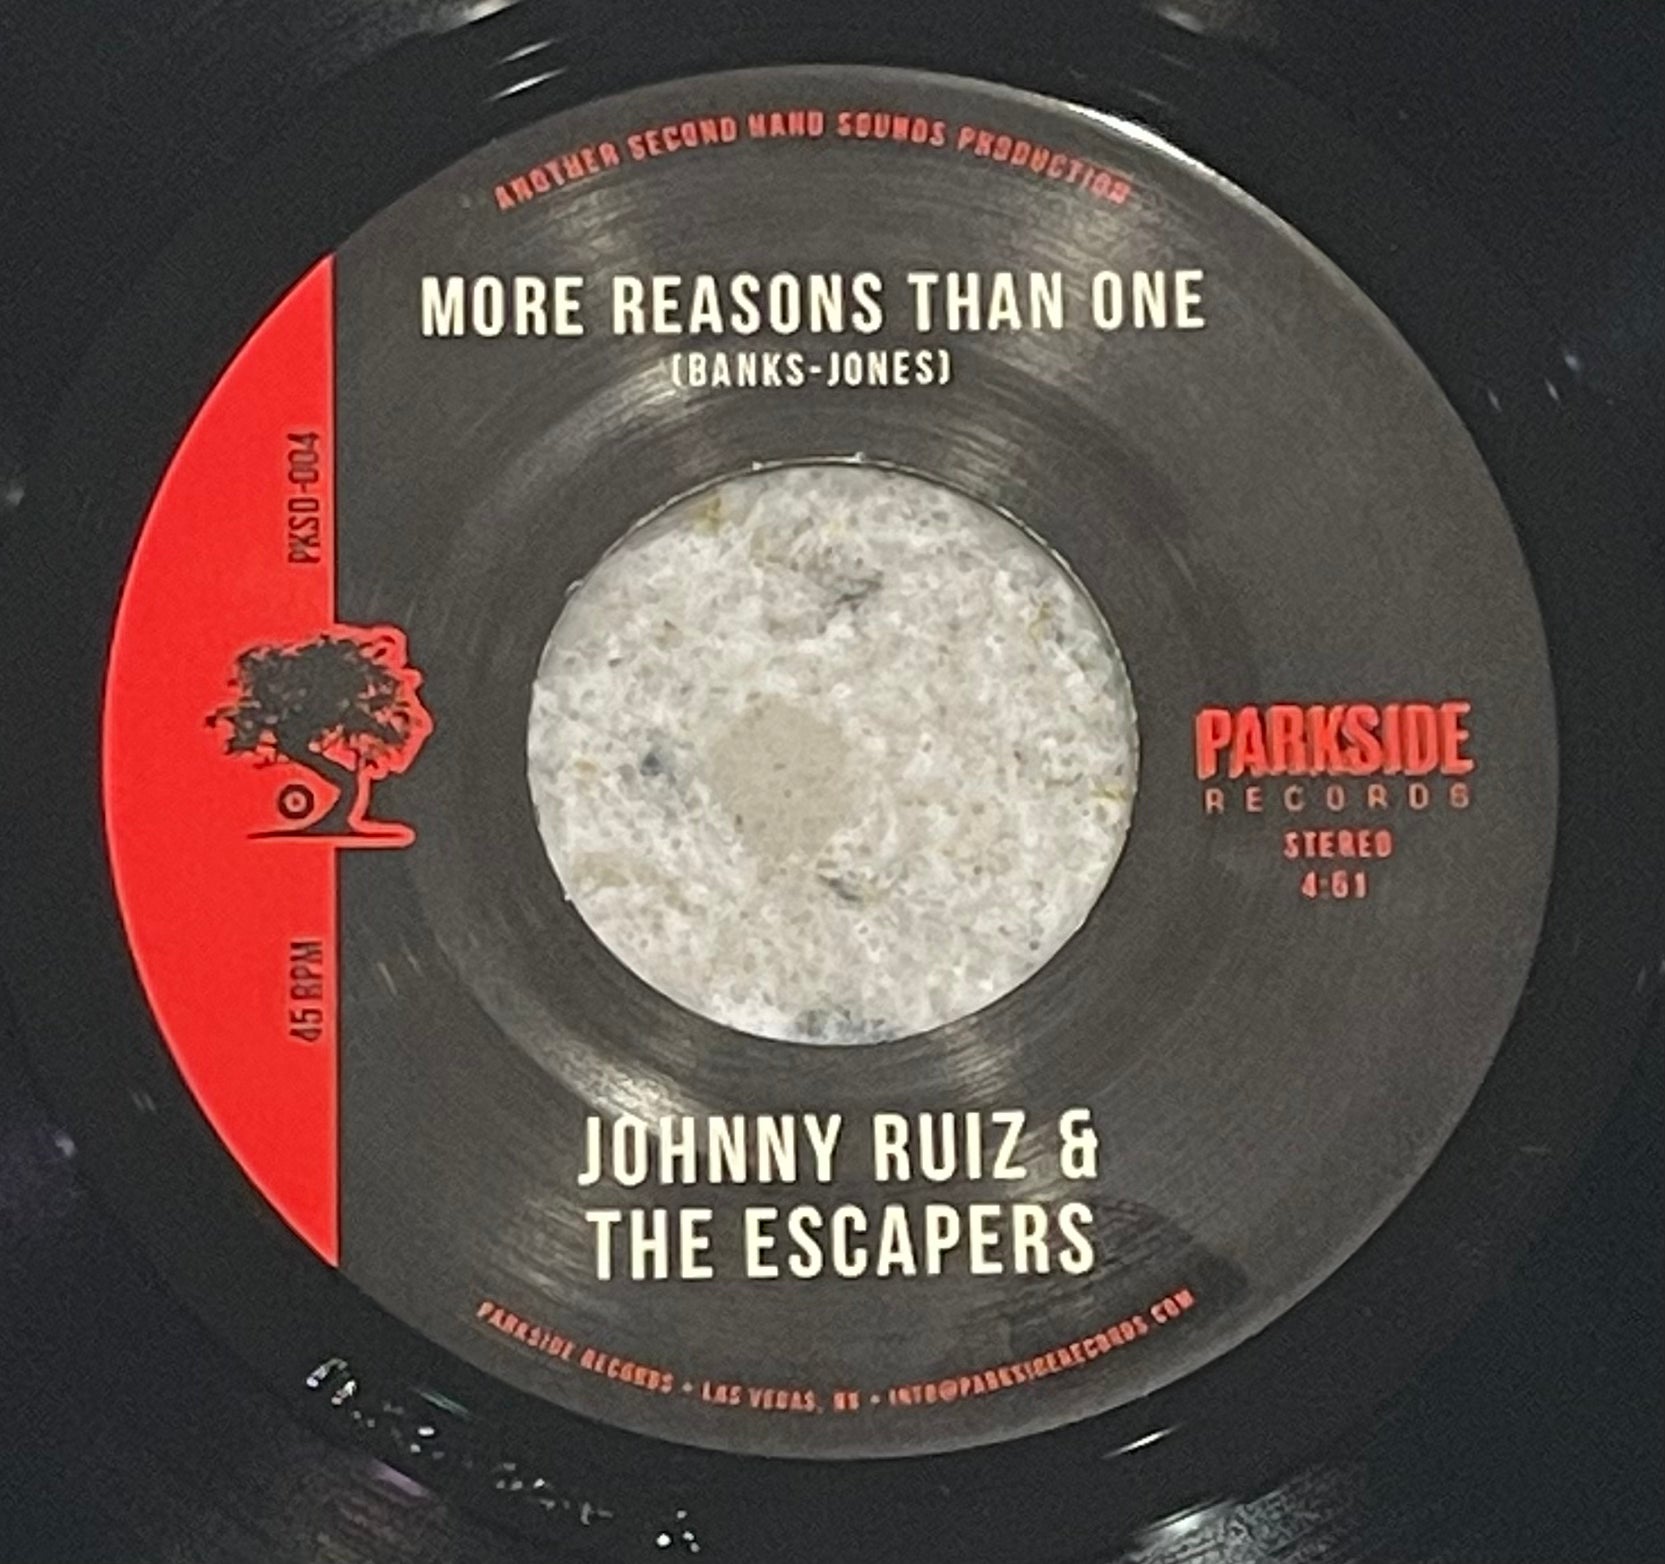 Johnny Ruiz & The Escapers - More Reasons Than One b/w Stay In Dub